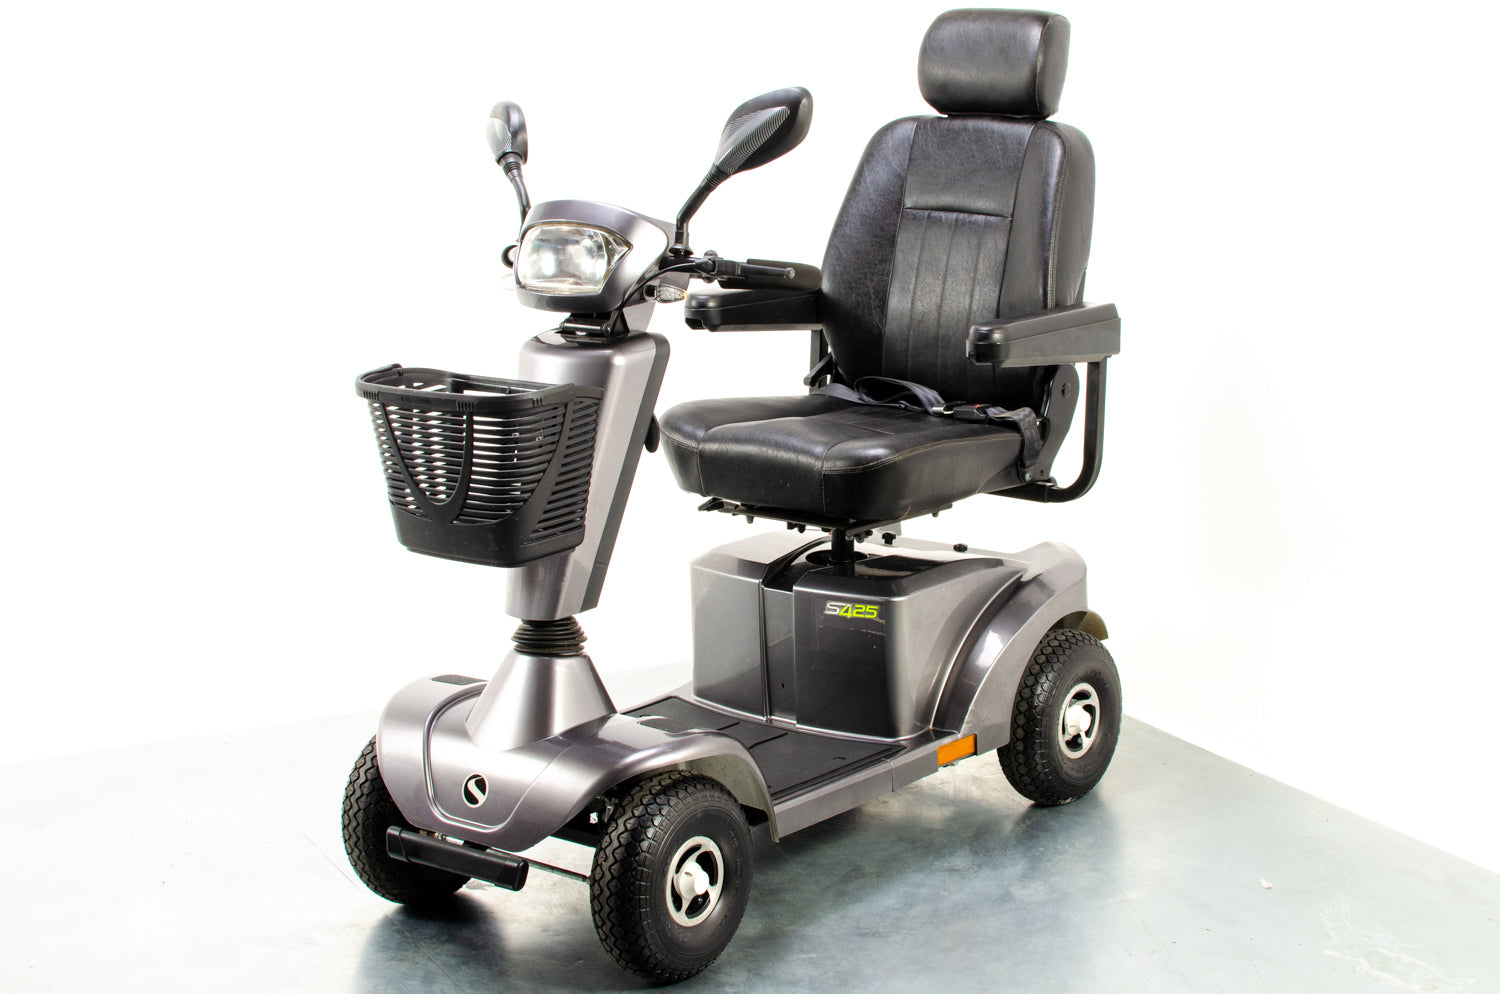 Sunrise Medical Sterling S425 Used Electric Mobility Scooter 8mph Midsize Suspension Comfy Grey